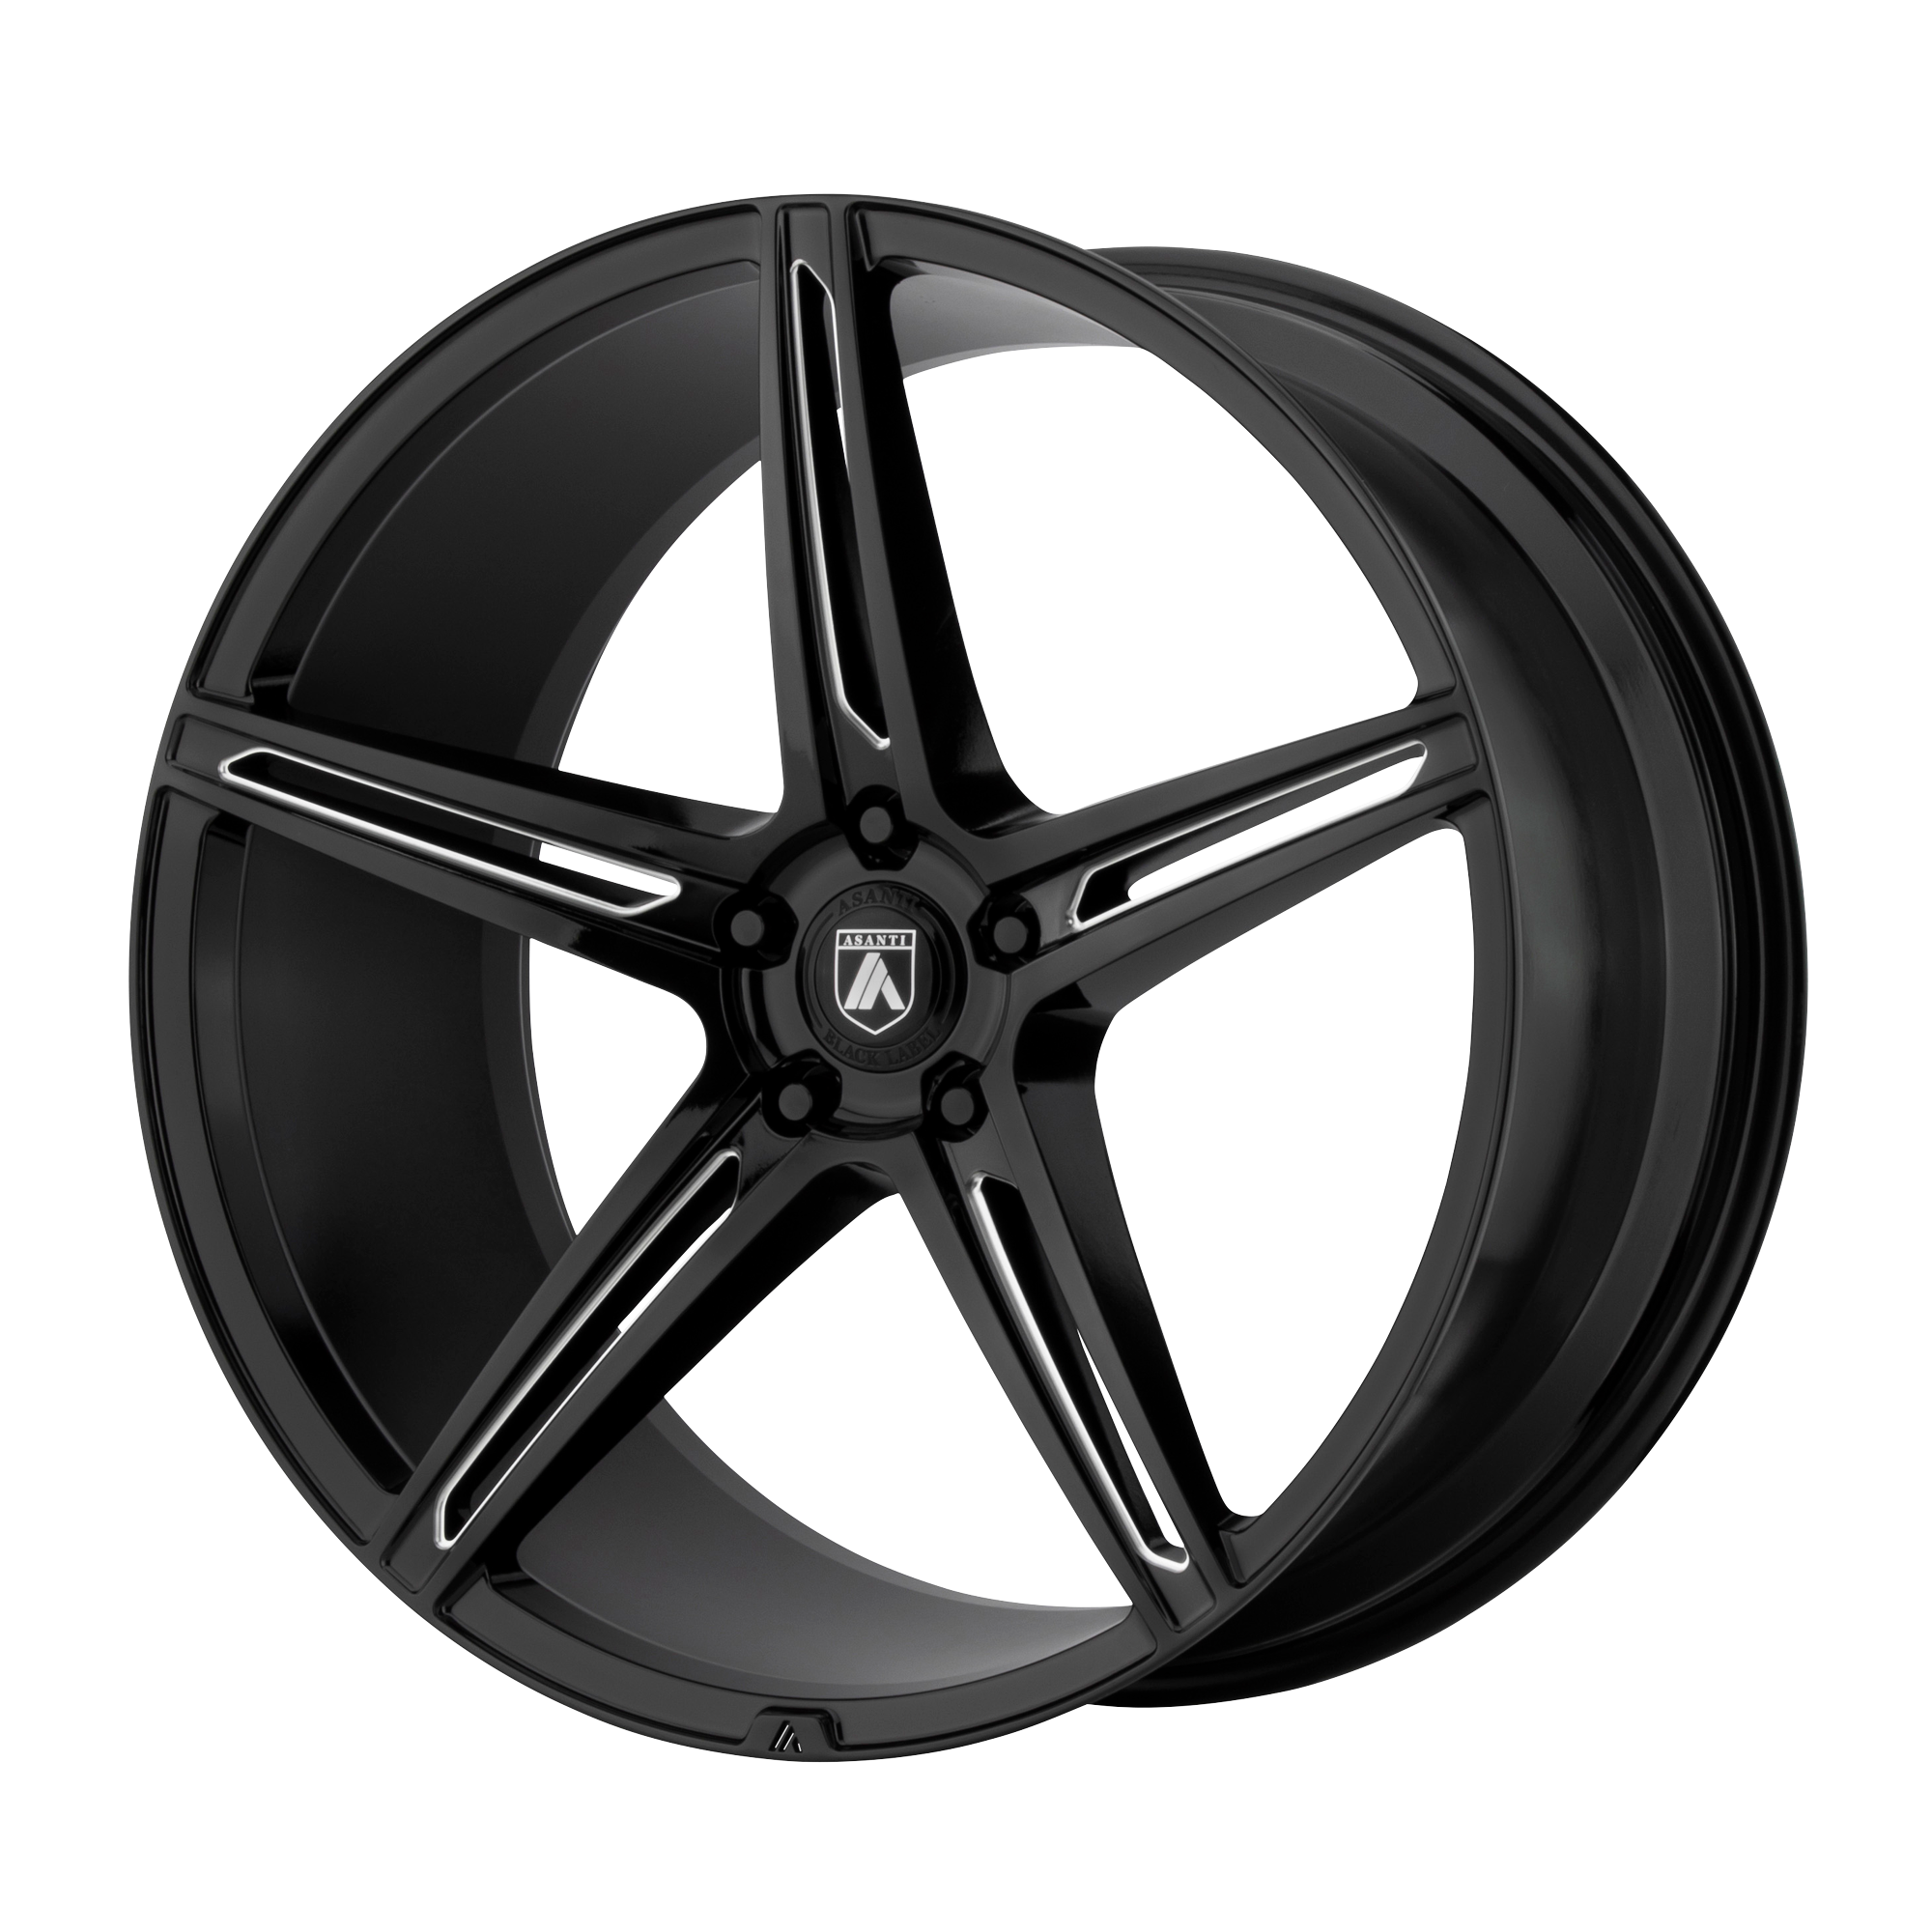 ALPHA 5 20x9 5x120.00 GLOSS BLACK MILLED (35 mm) - Tires and Engine Performance